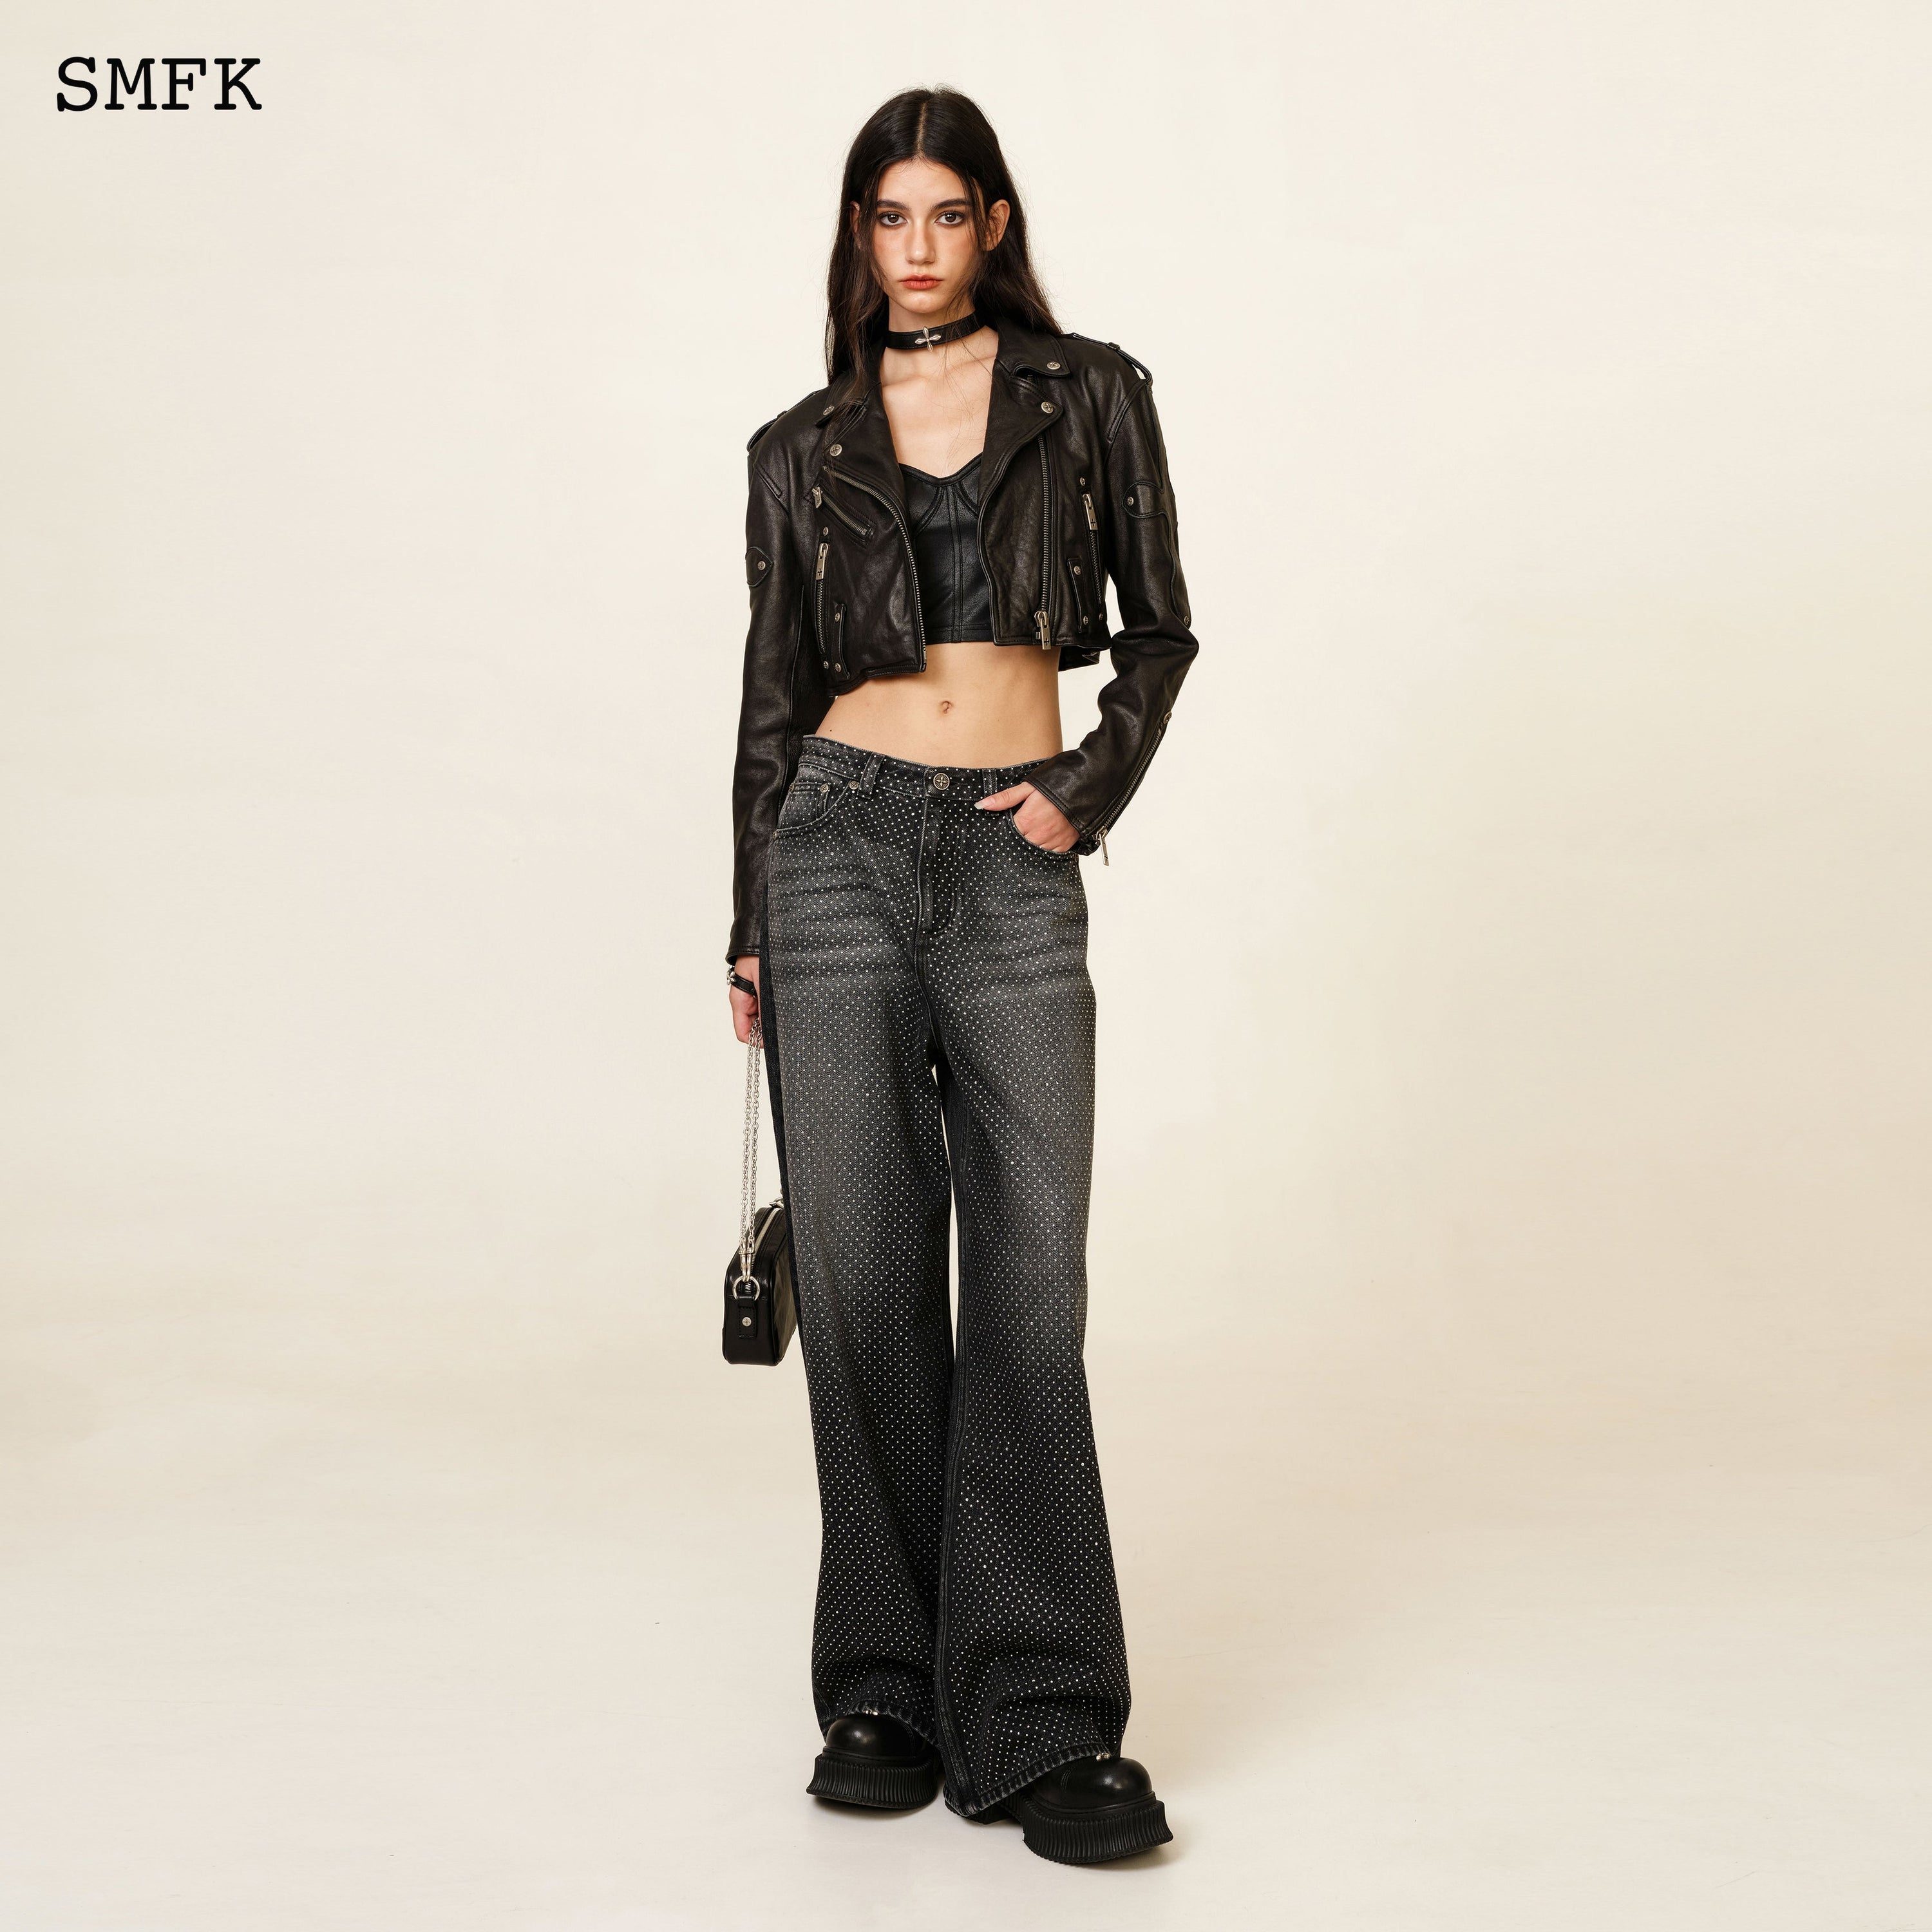 Ancient Myth Diamond Flared Jeans In Black - SMFK Official